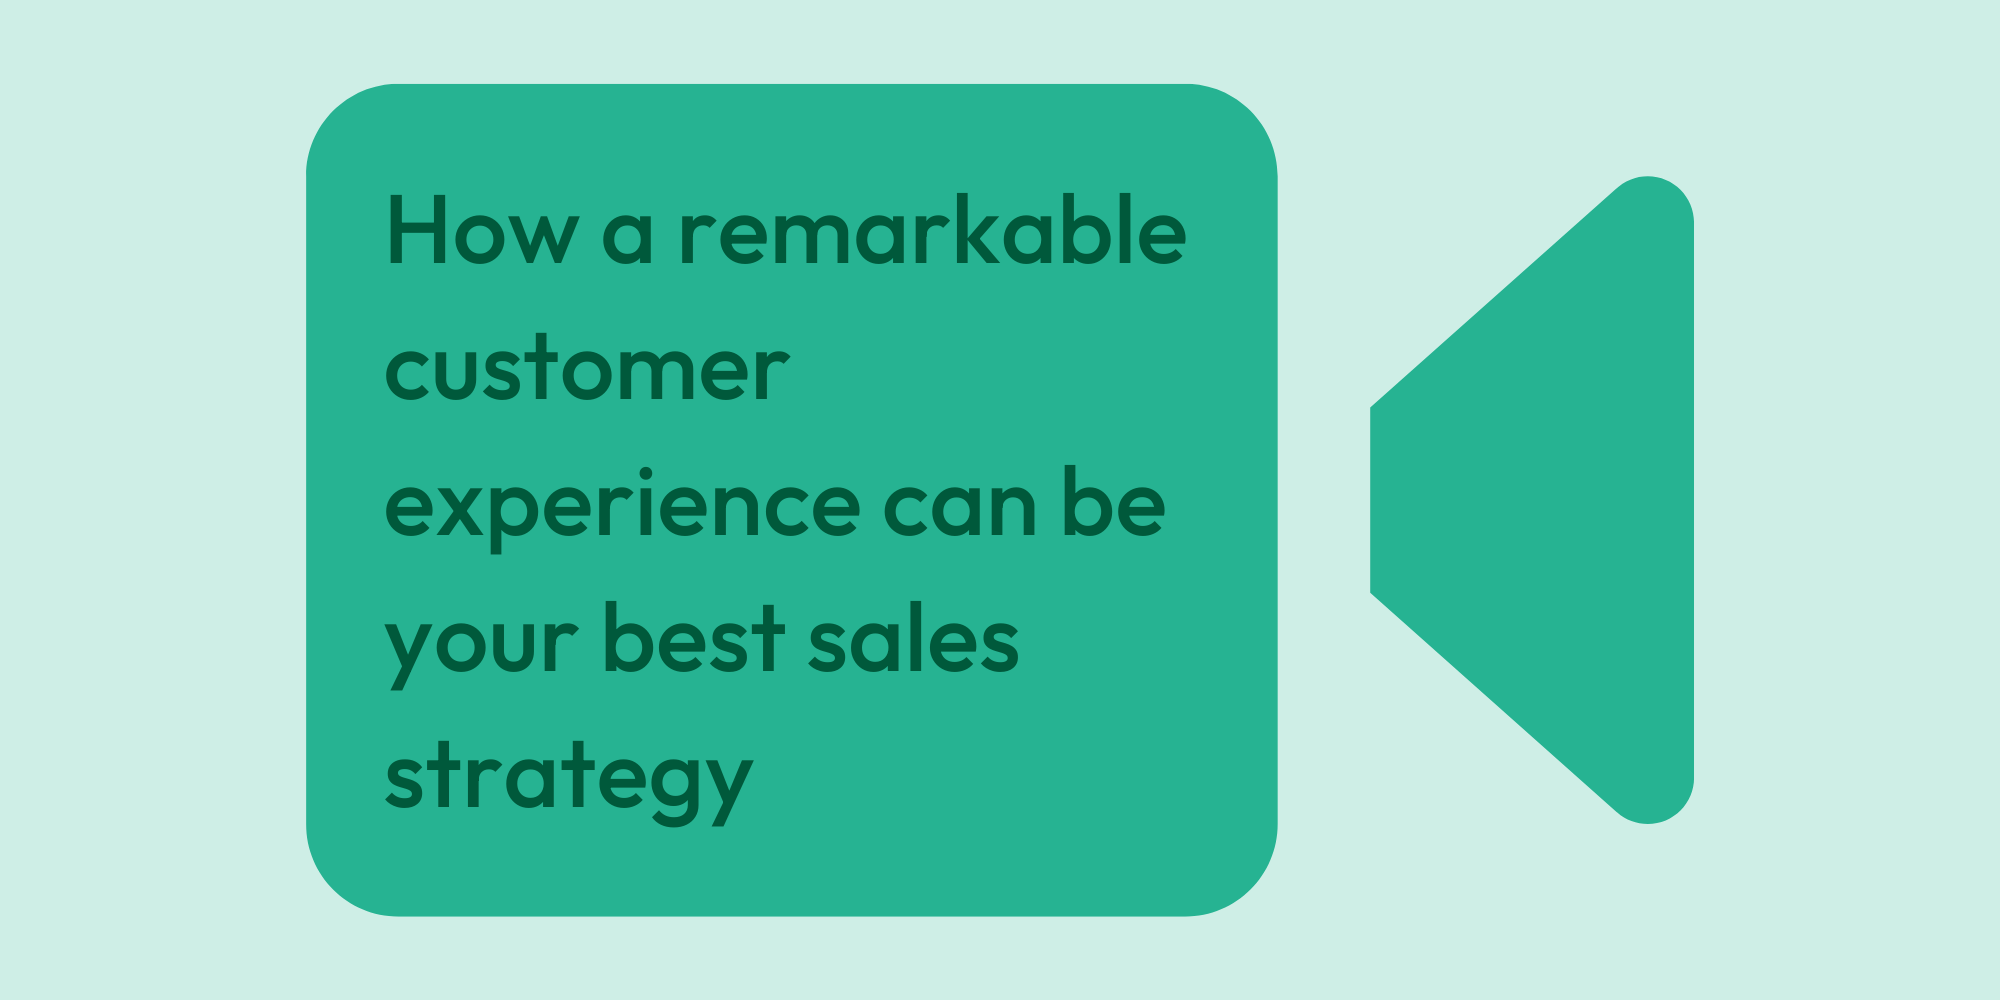 How a remarkable customer experience can be your best sales strategy